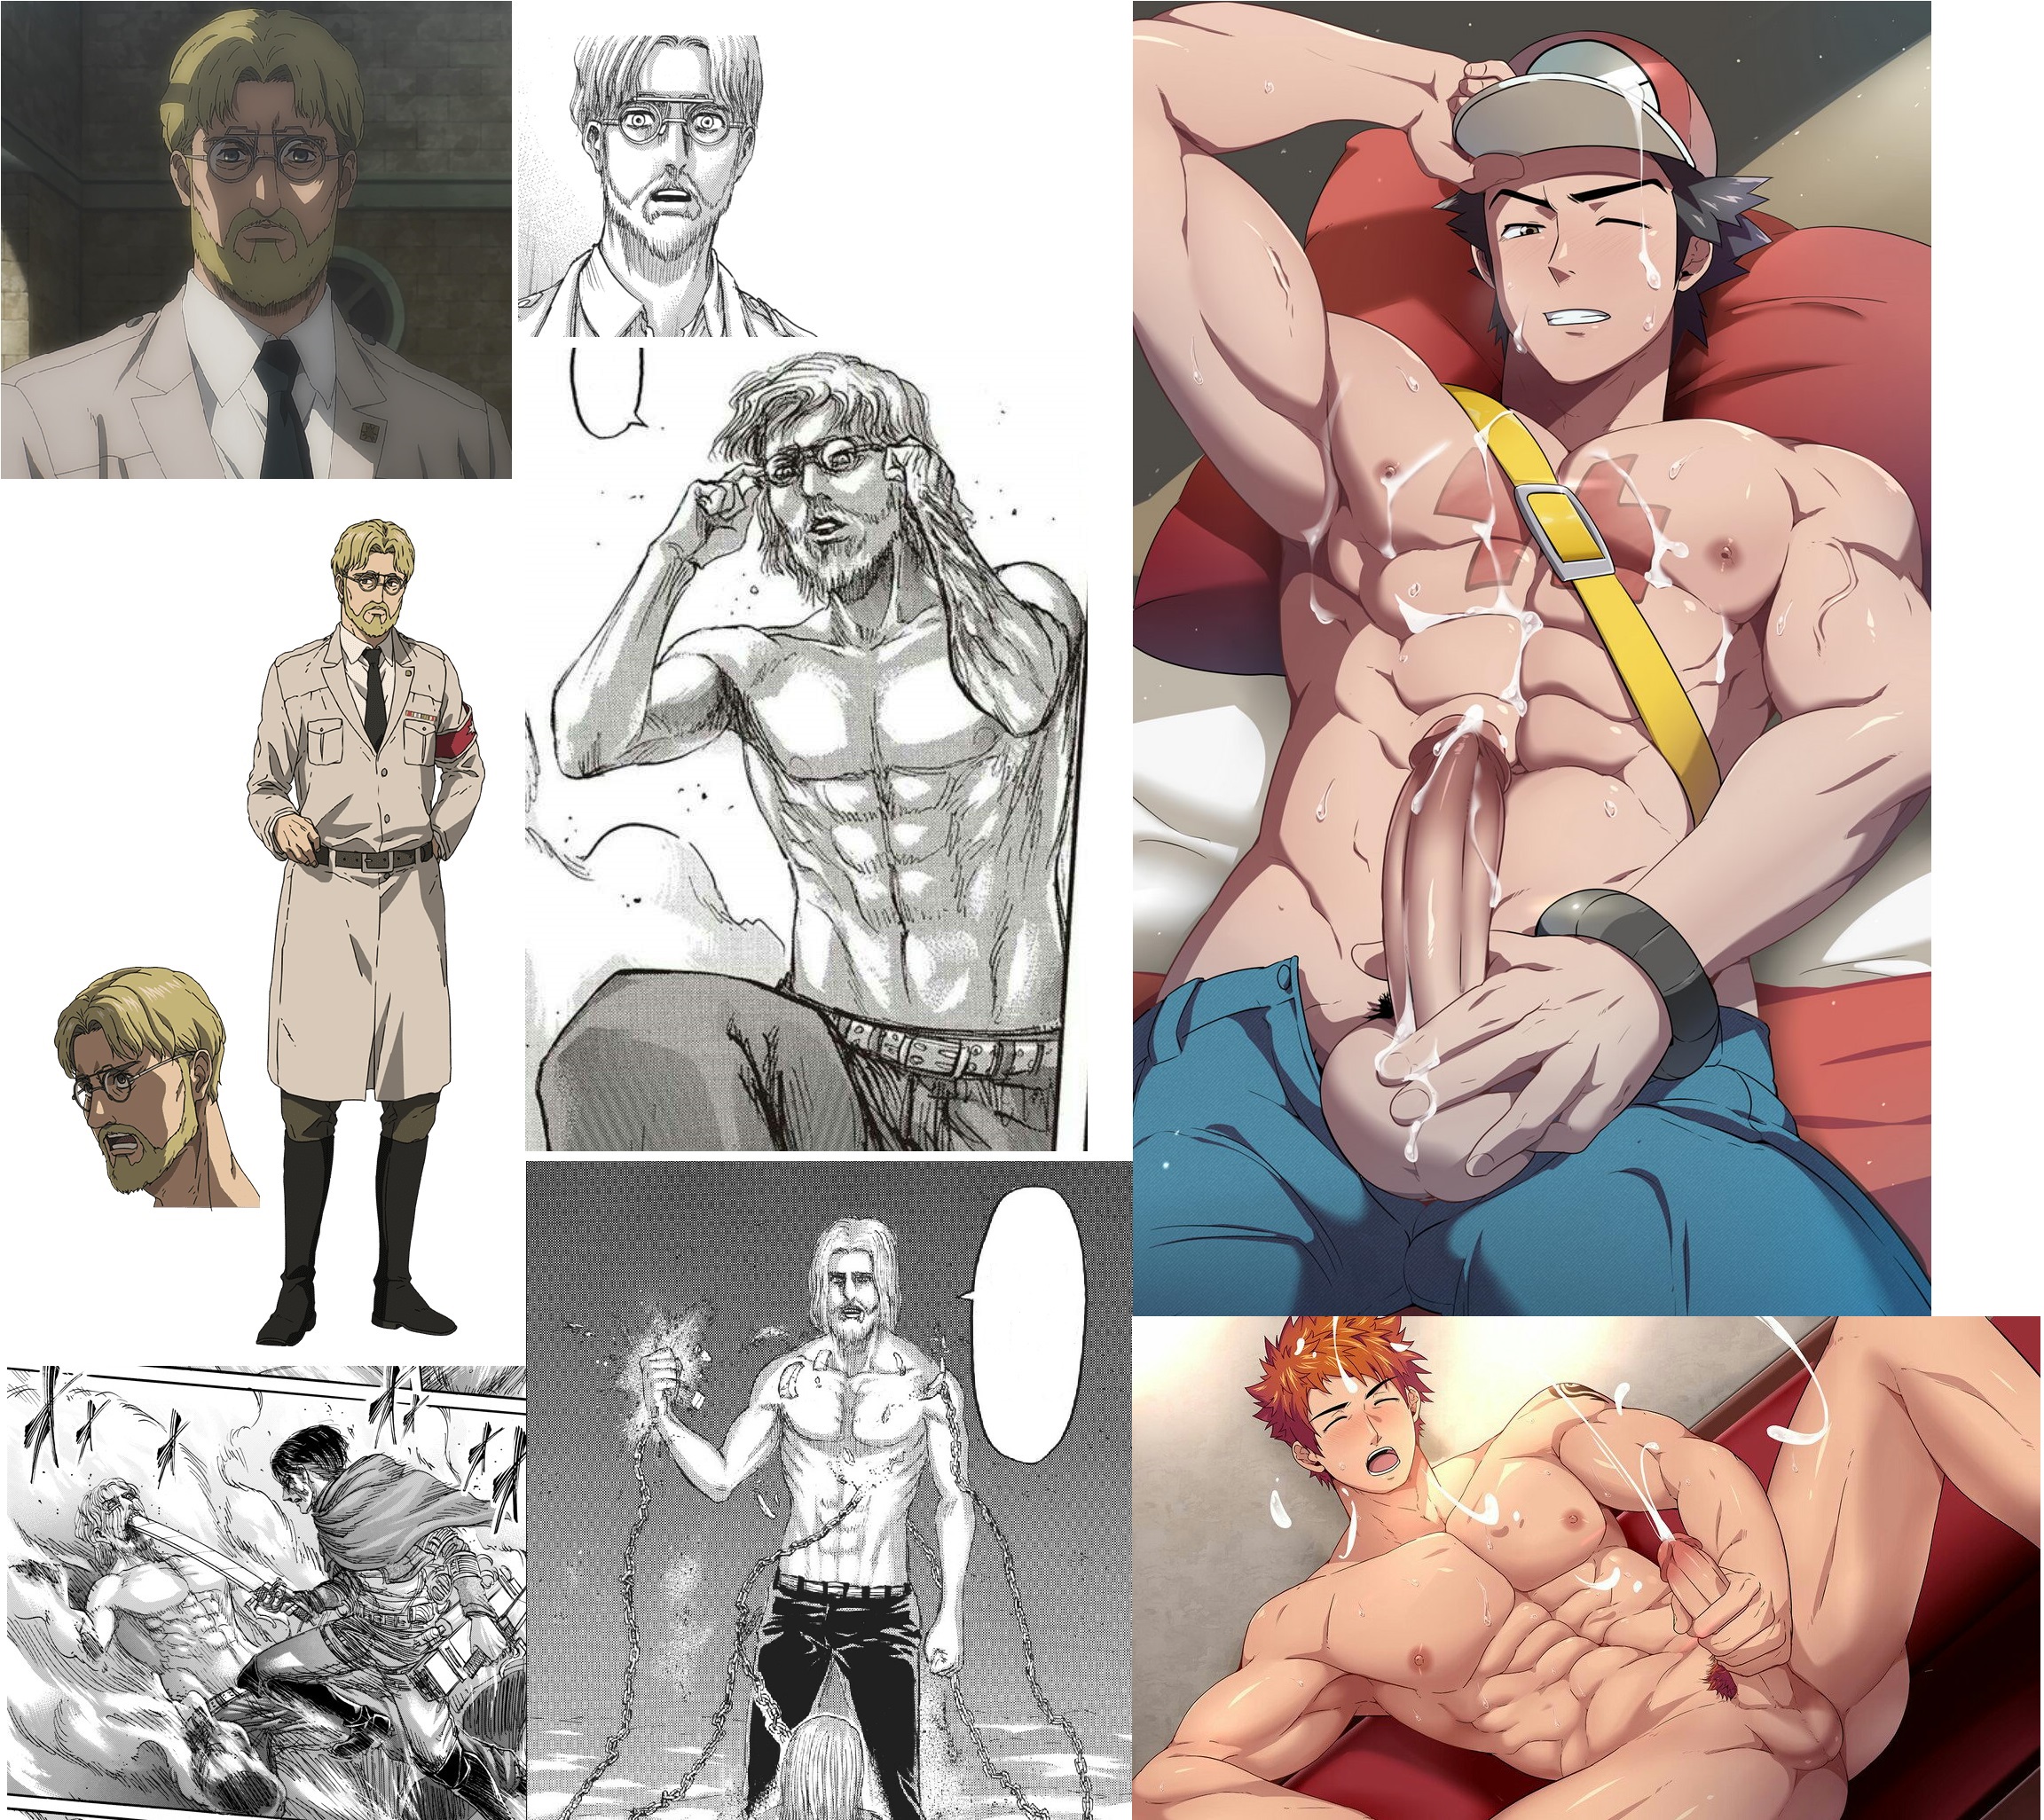 Requesting Zeke Jaeger from Attack on titan masturbating, extra points if h...